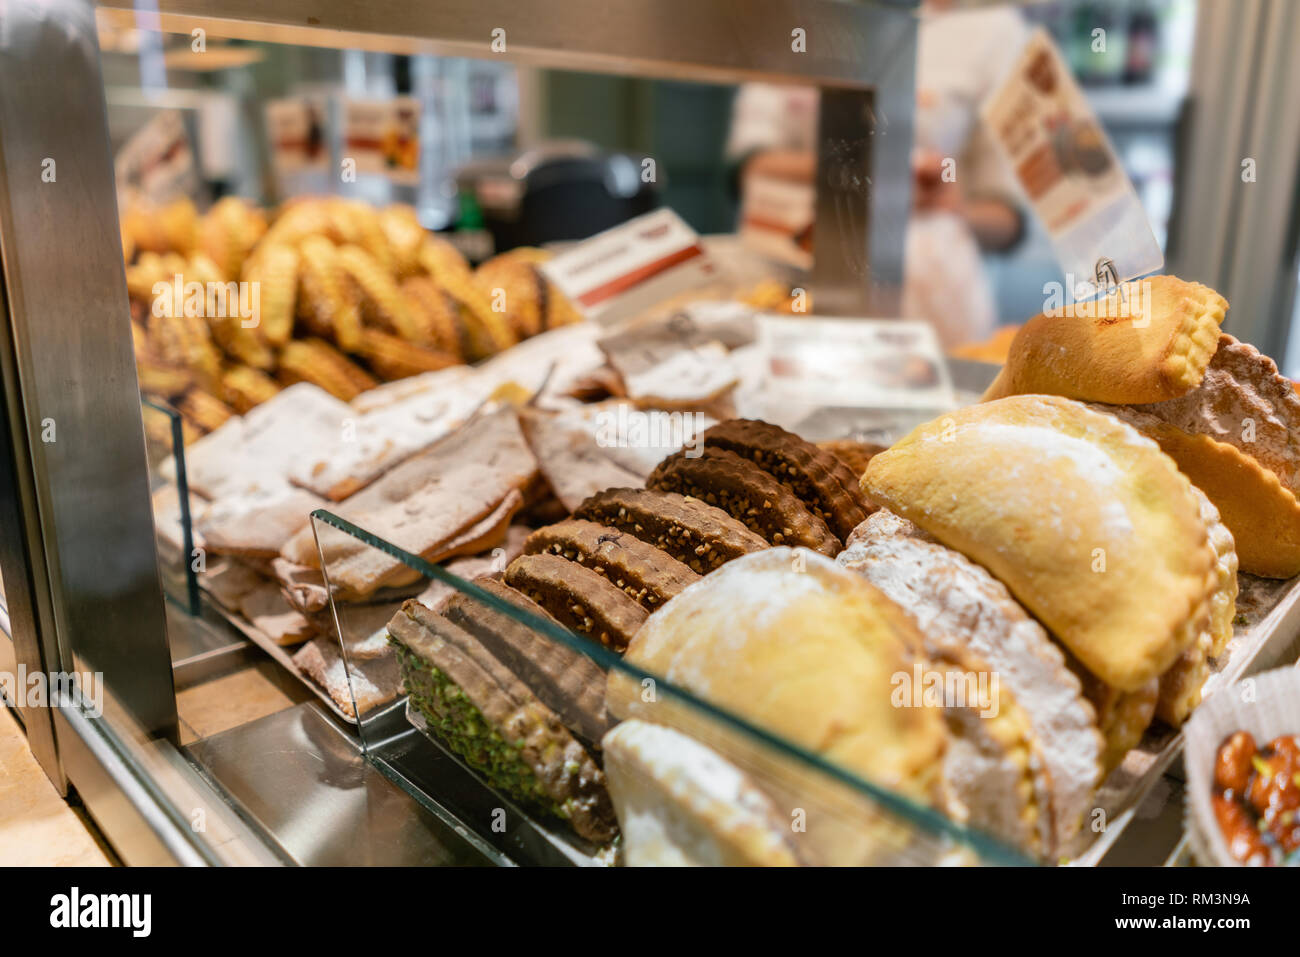 Buns, pies, biscuits and other pastries. Showcase desserts in an Italian cafe or trattoria. Variety of cakes on display. Stock Photo